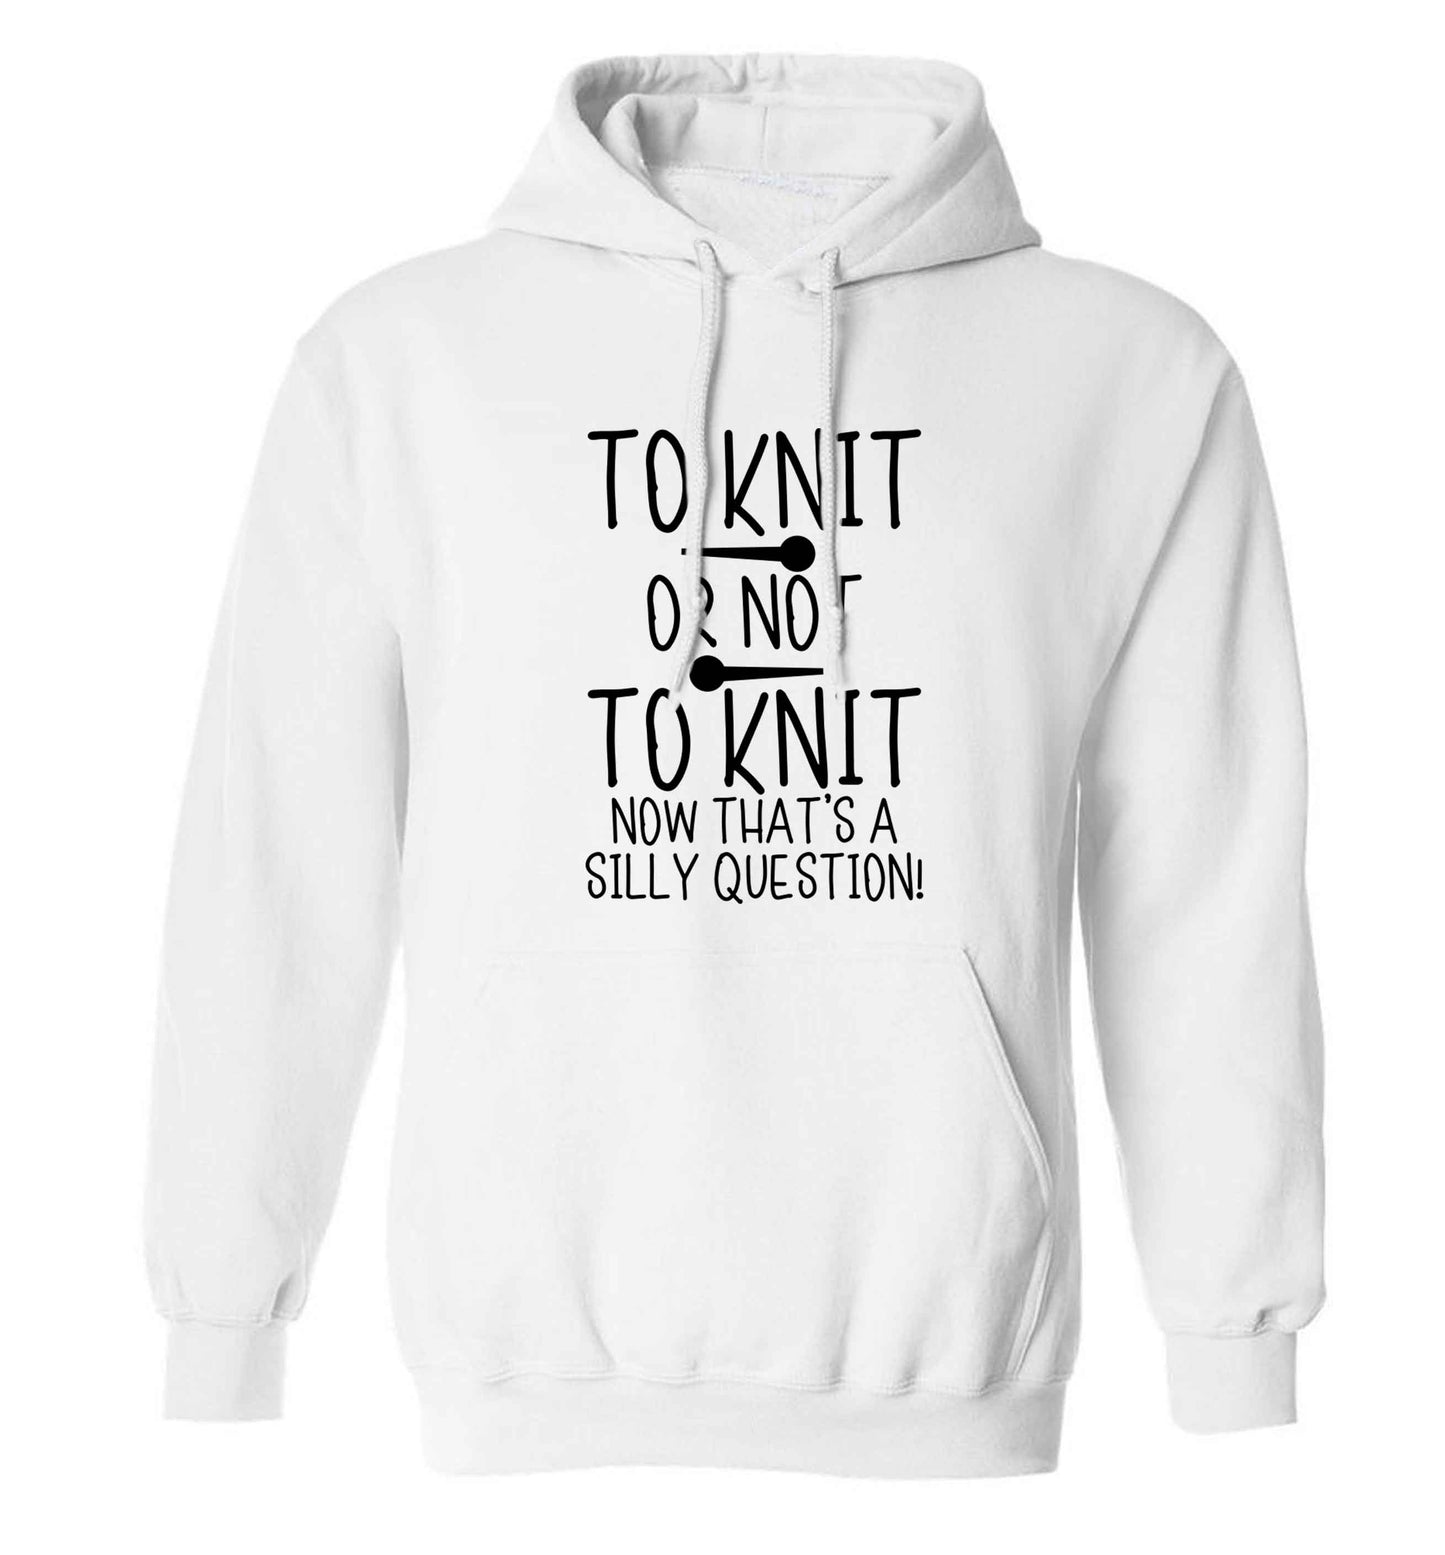 To knit or not to knit now that's a silly question adults unisex white hoodie 2XL